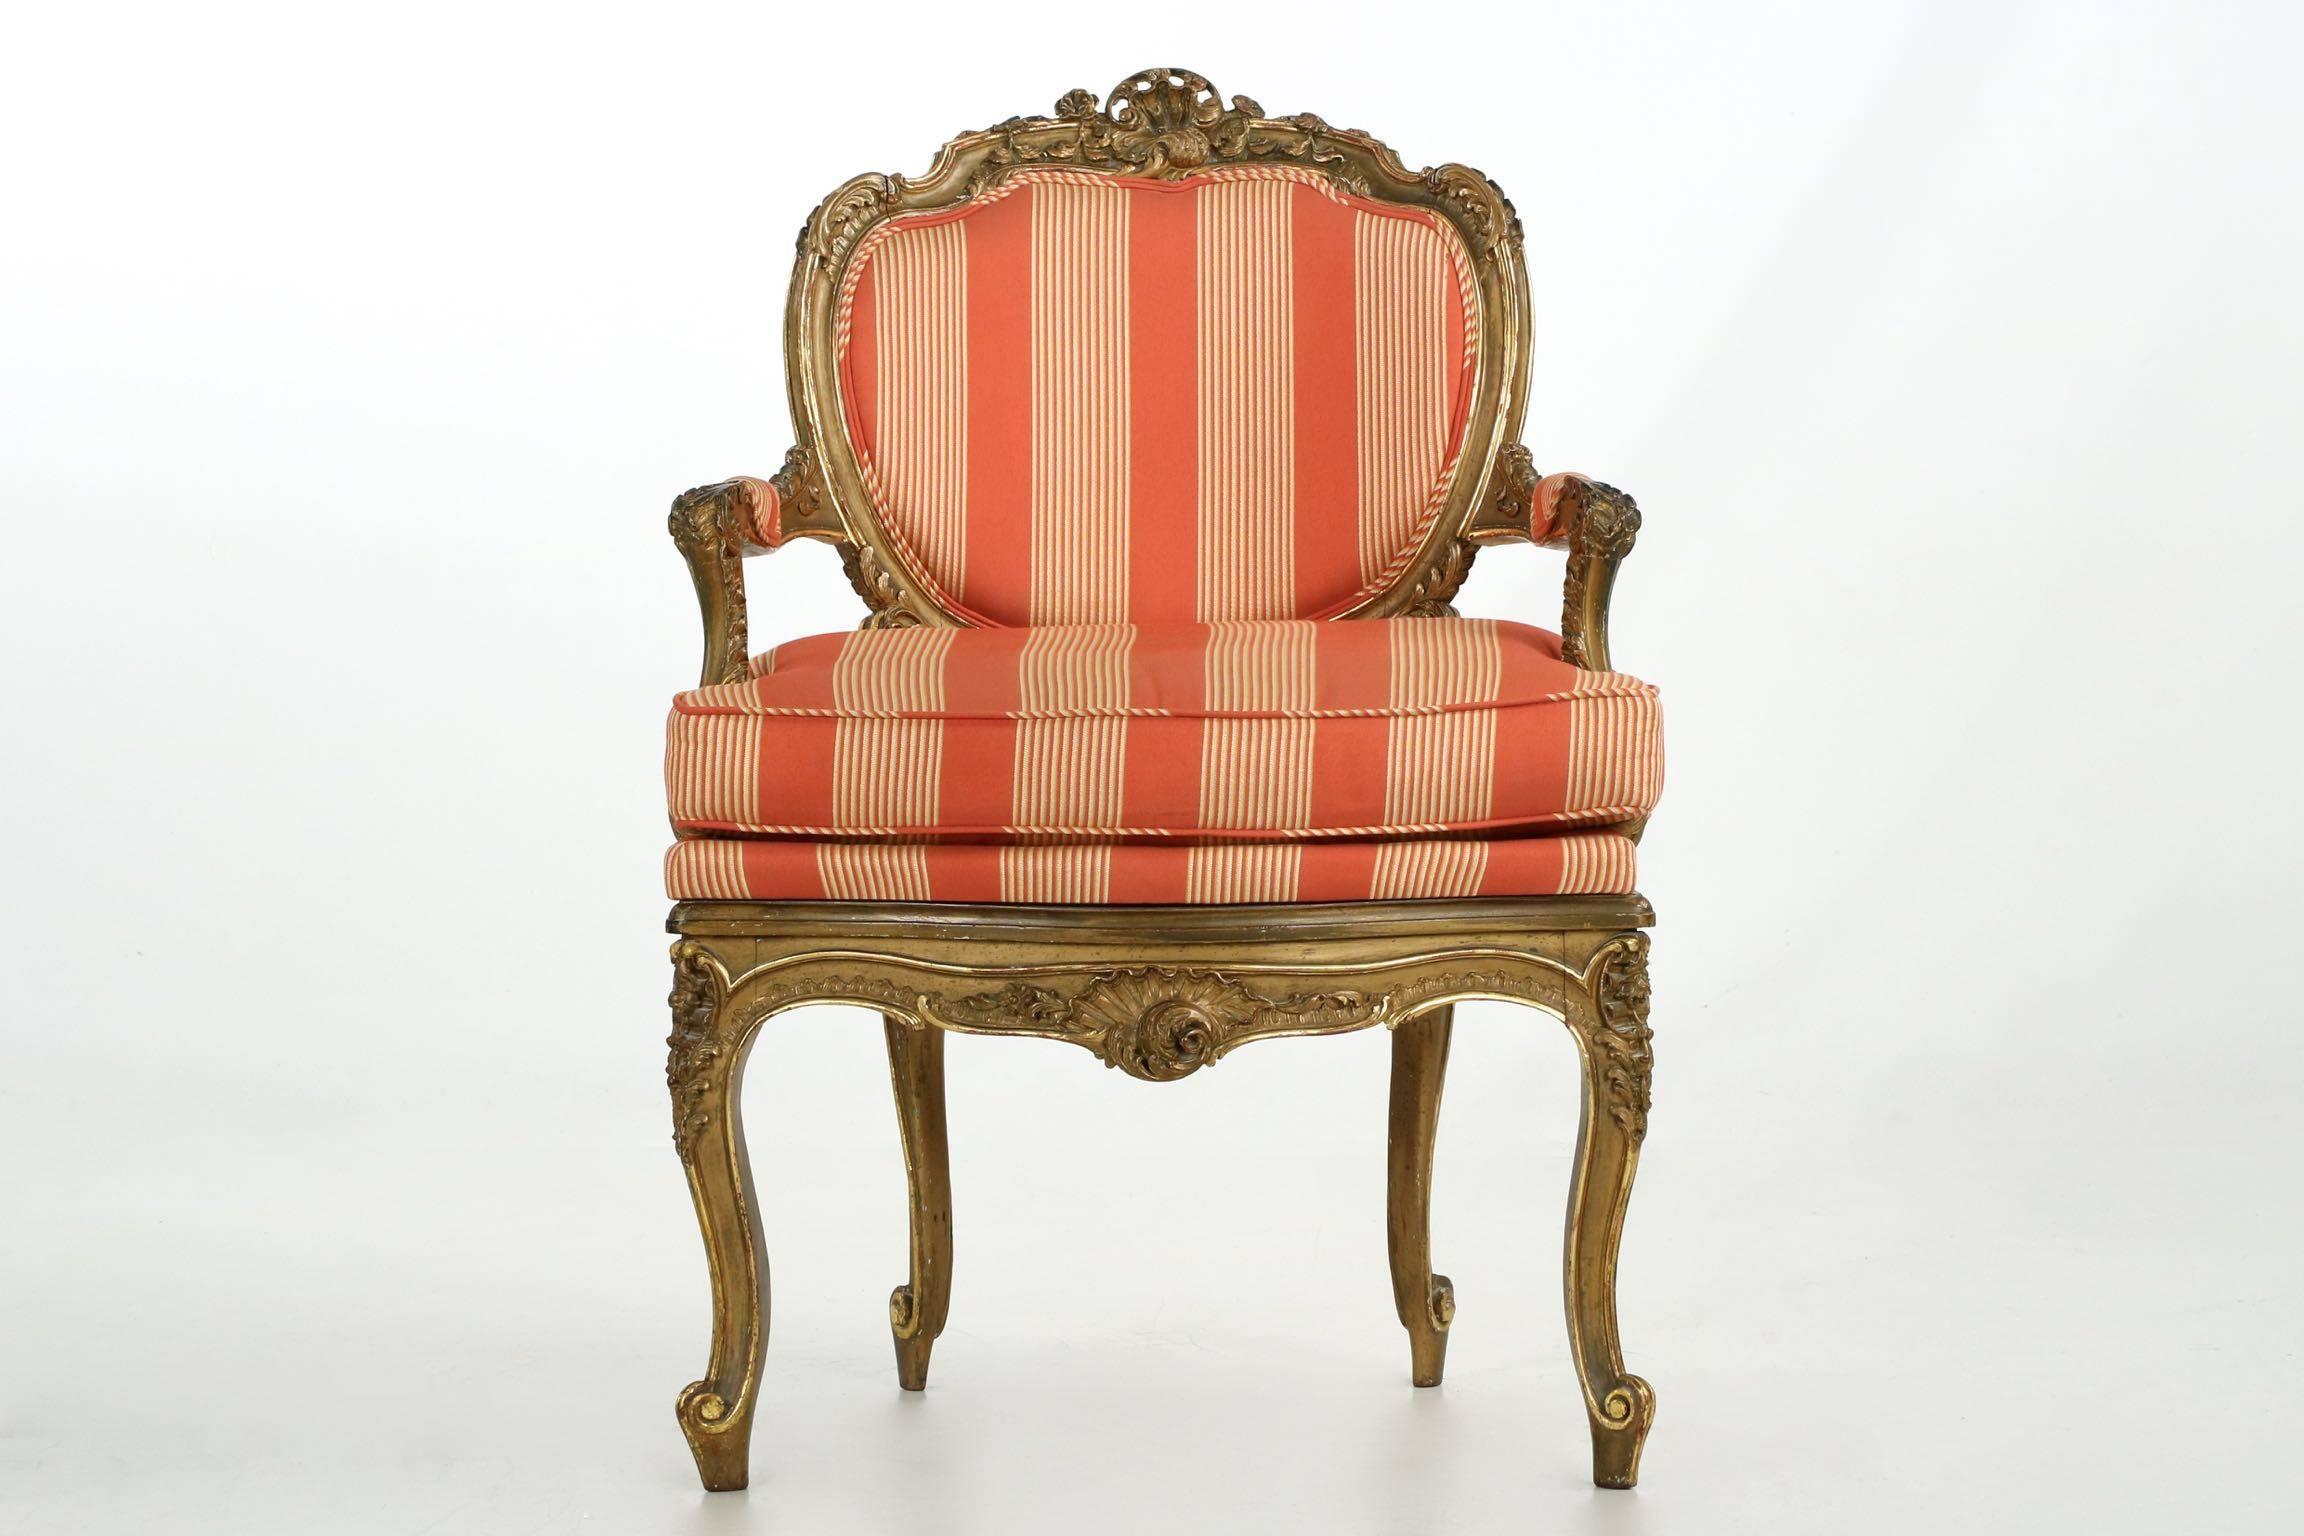 Crafted most likely in France during the third quarter of the 19th century, this finely carved giltwood chair is a wonderful accent piece with it’s curvy Rococo seat back form walks a delicate balance between the heavy and light. A sense of airy